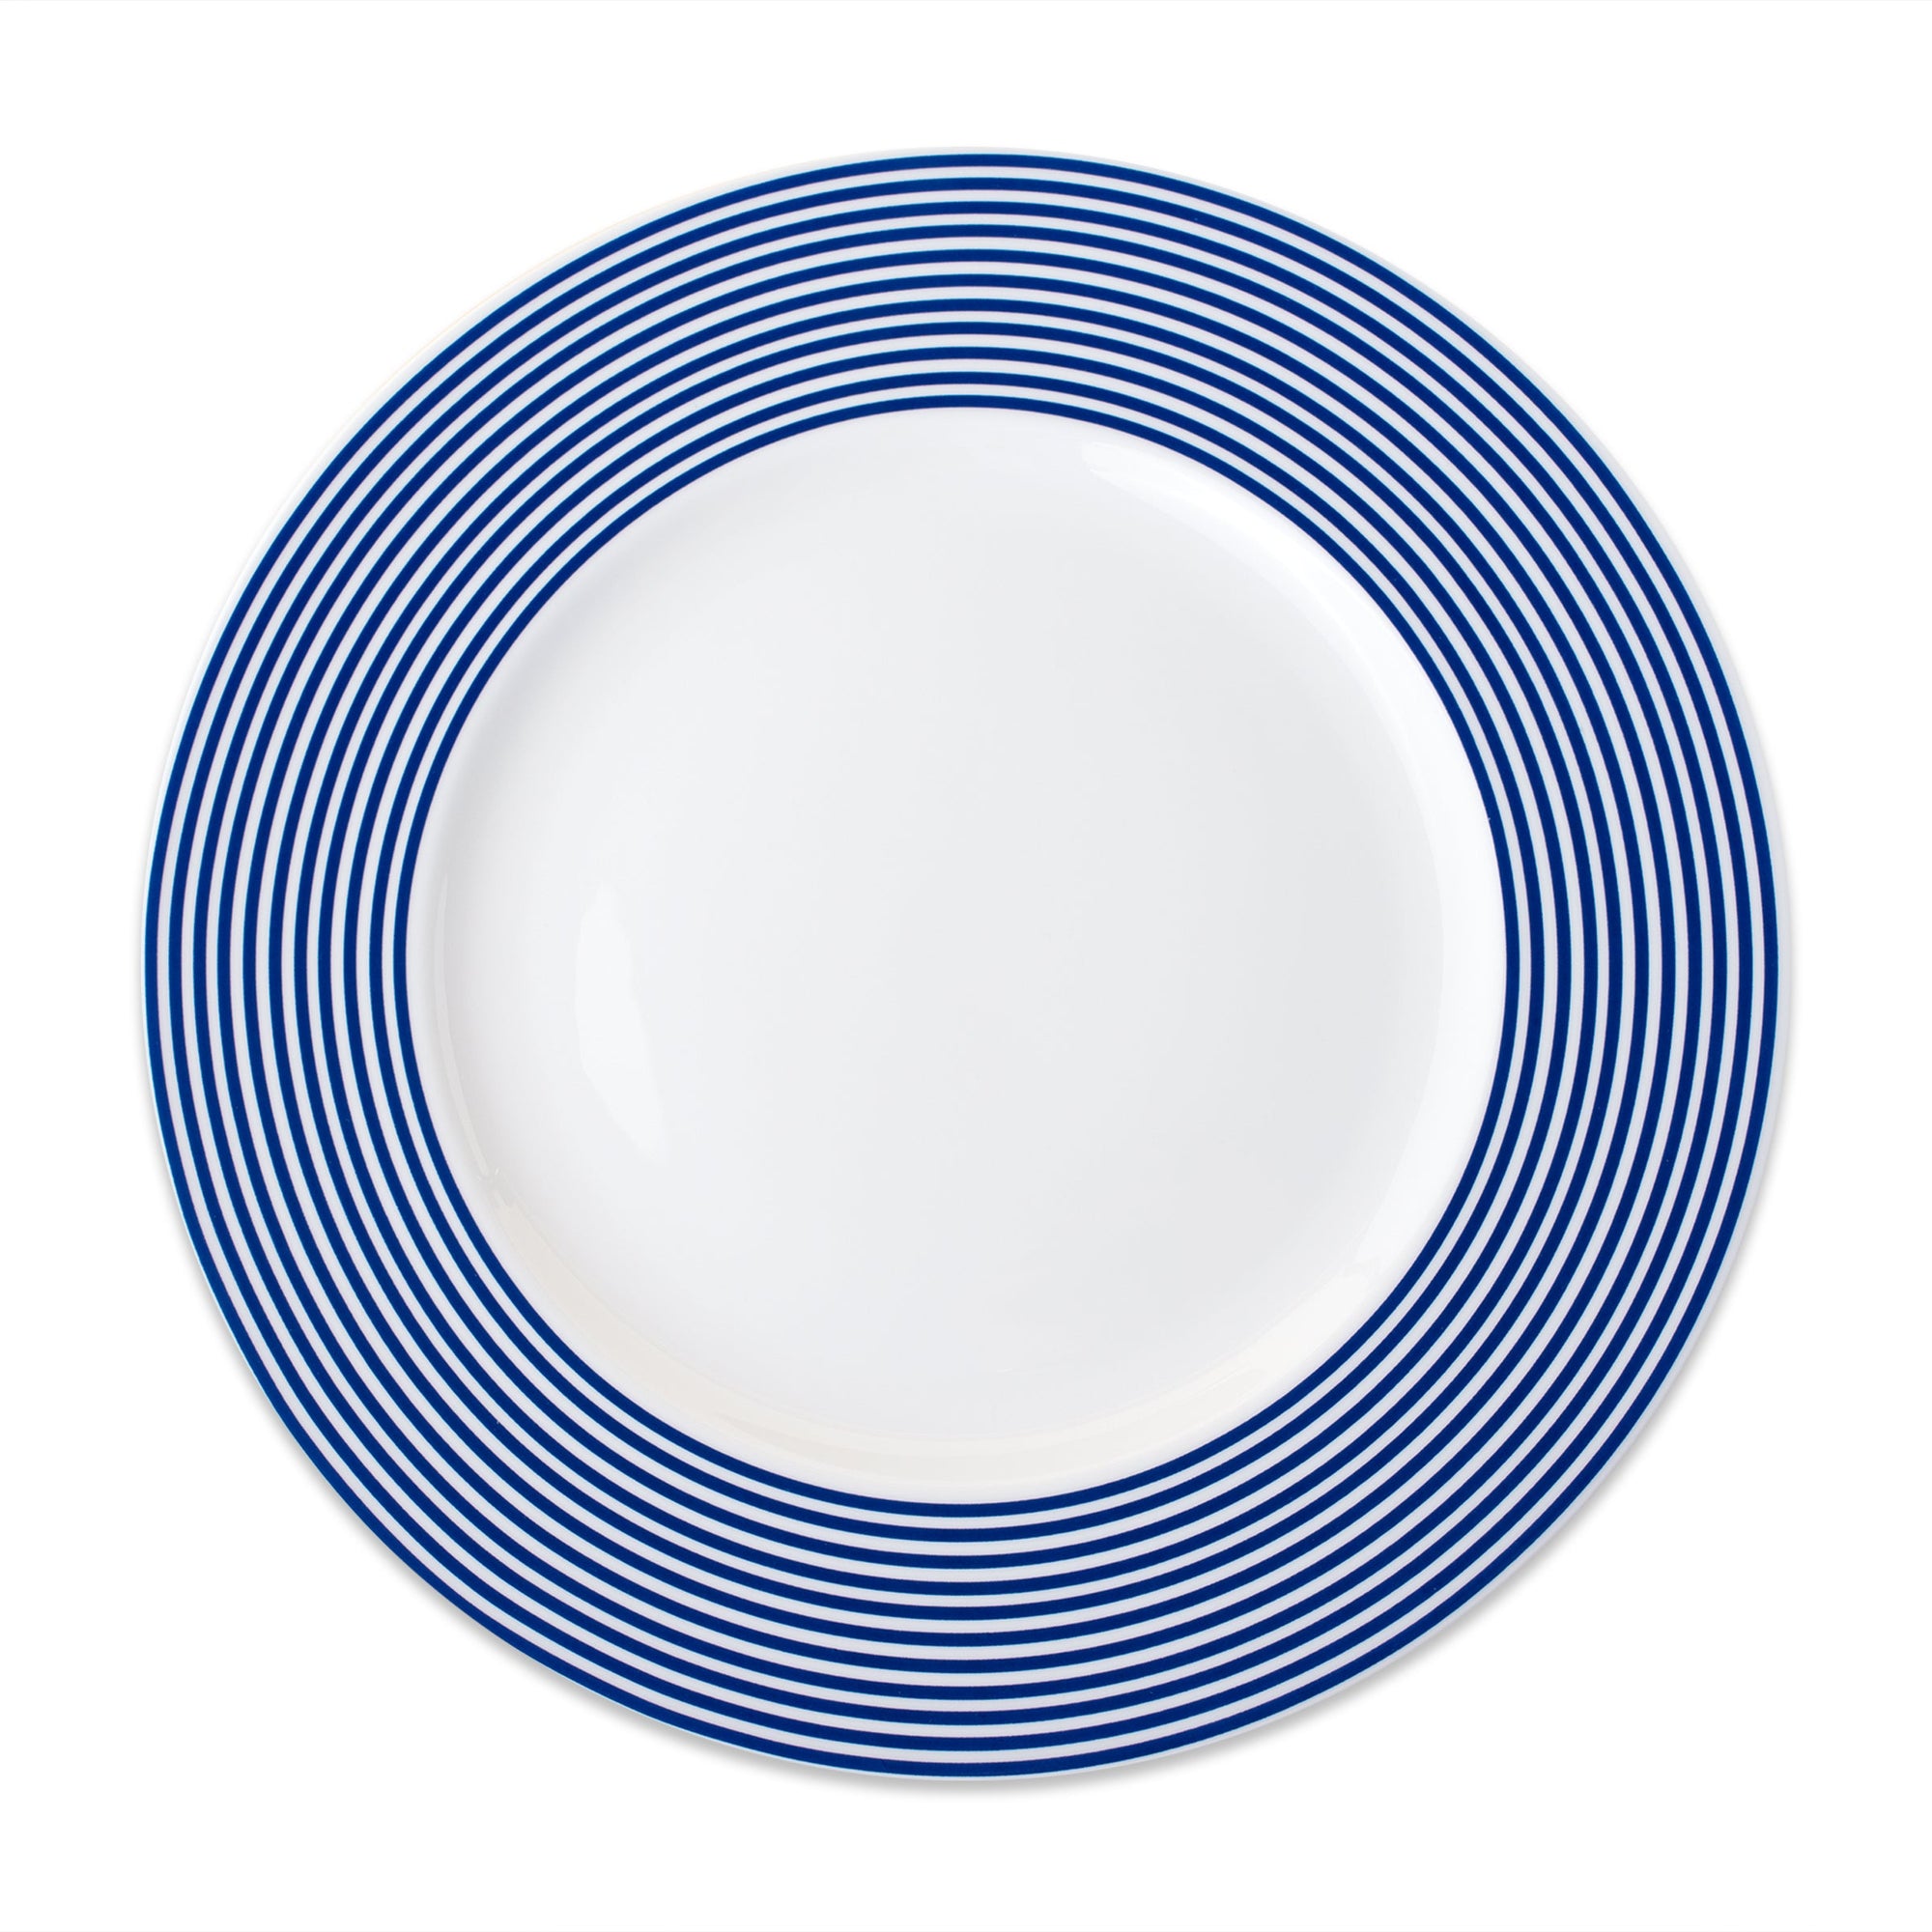 A Newport Racing Stripe Rimmed Dinner Plate from Caskata Artisanal Home, featuring blue and white stripes on a white background with porcelain layers.